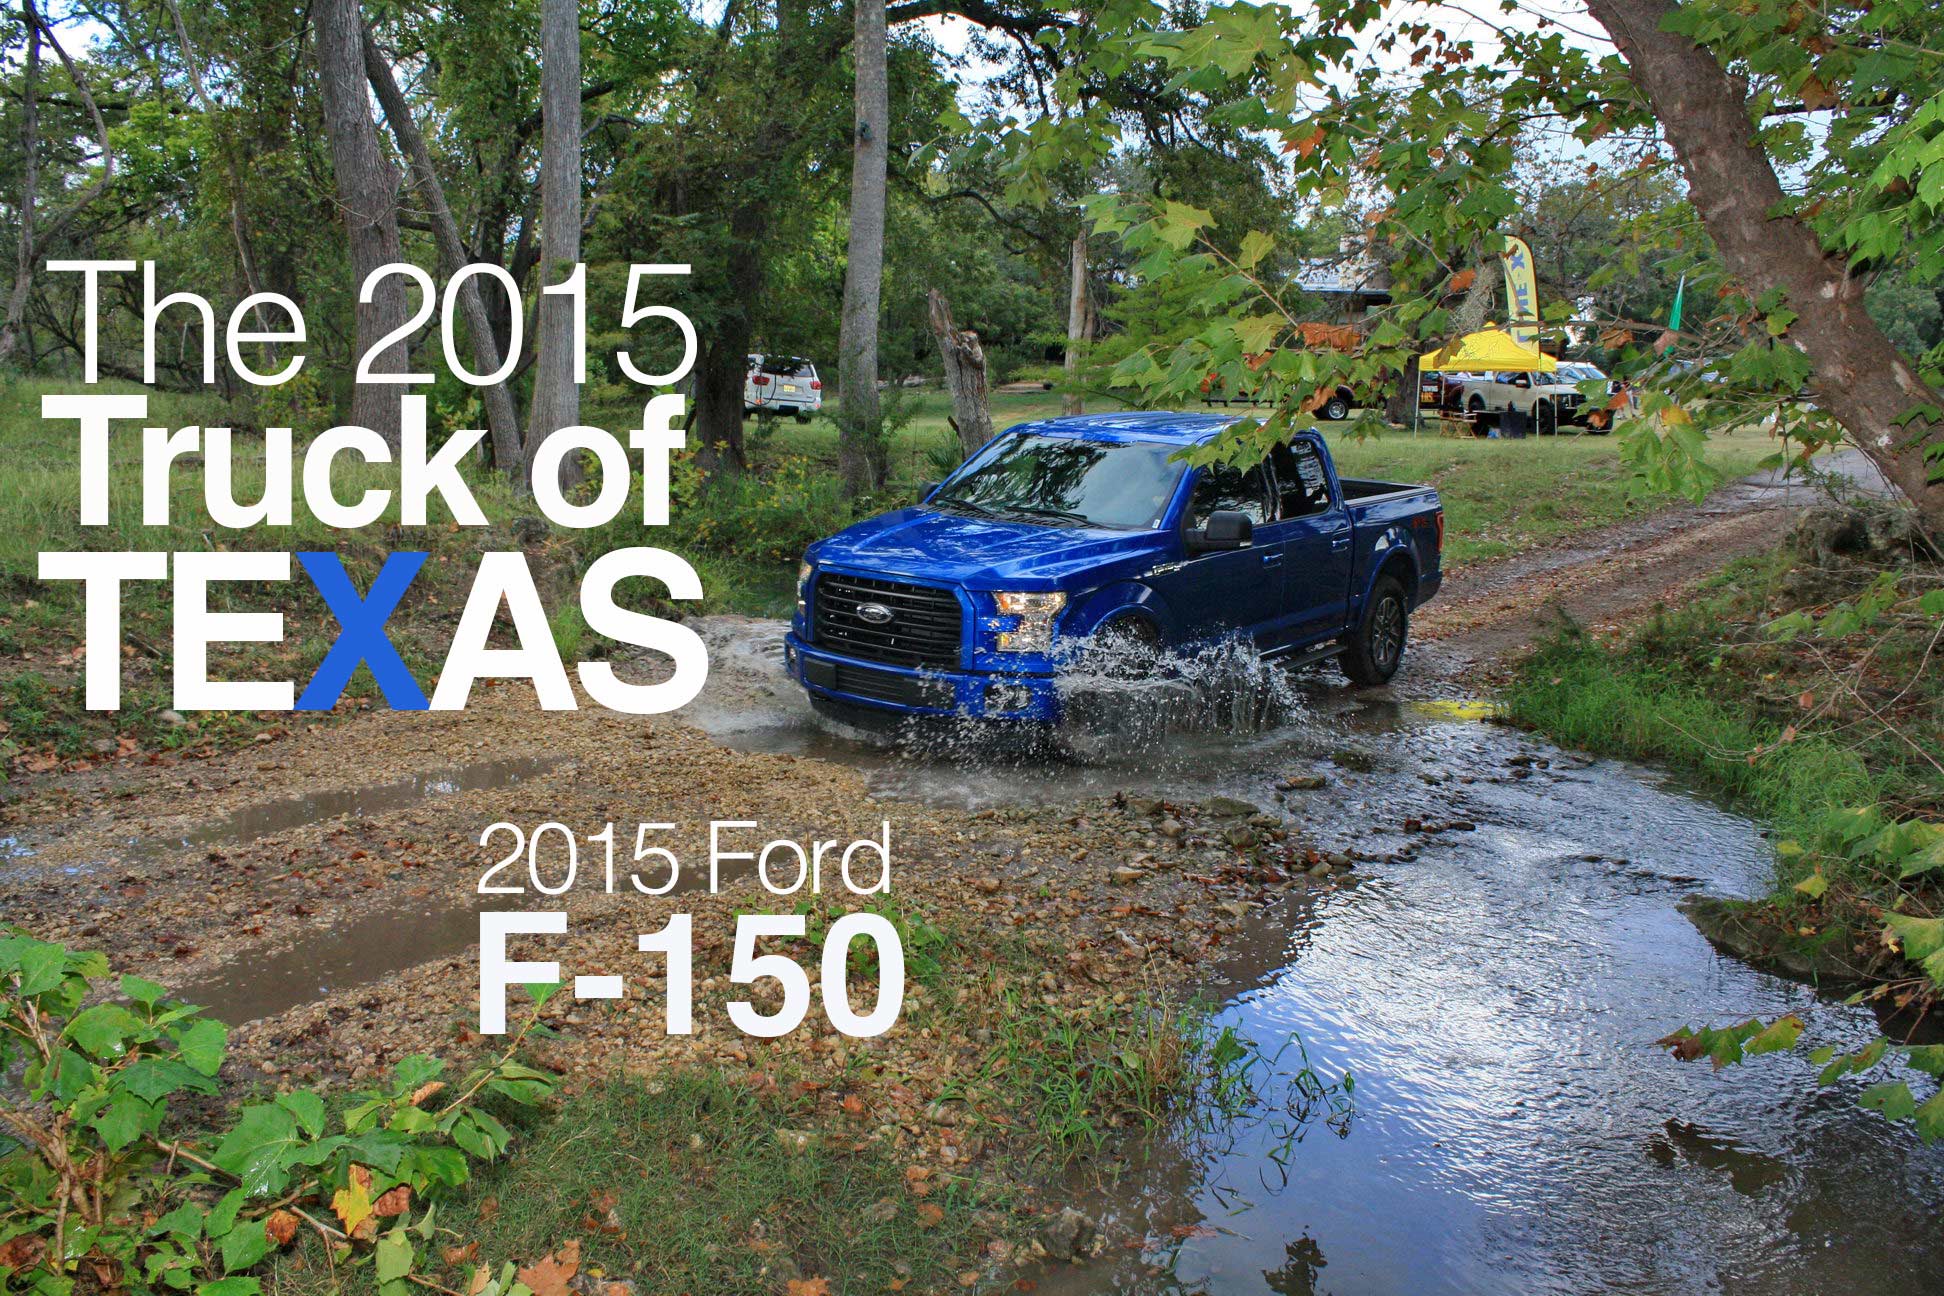 The 2015 Ford F-150 named Truck of Texas at the Texas Truck Rodeo